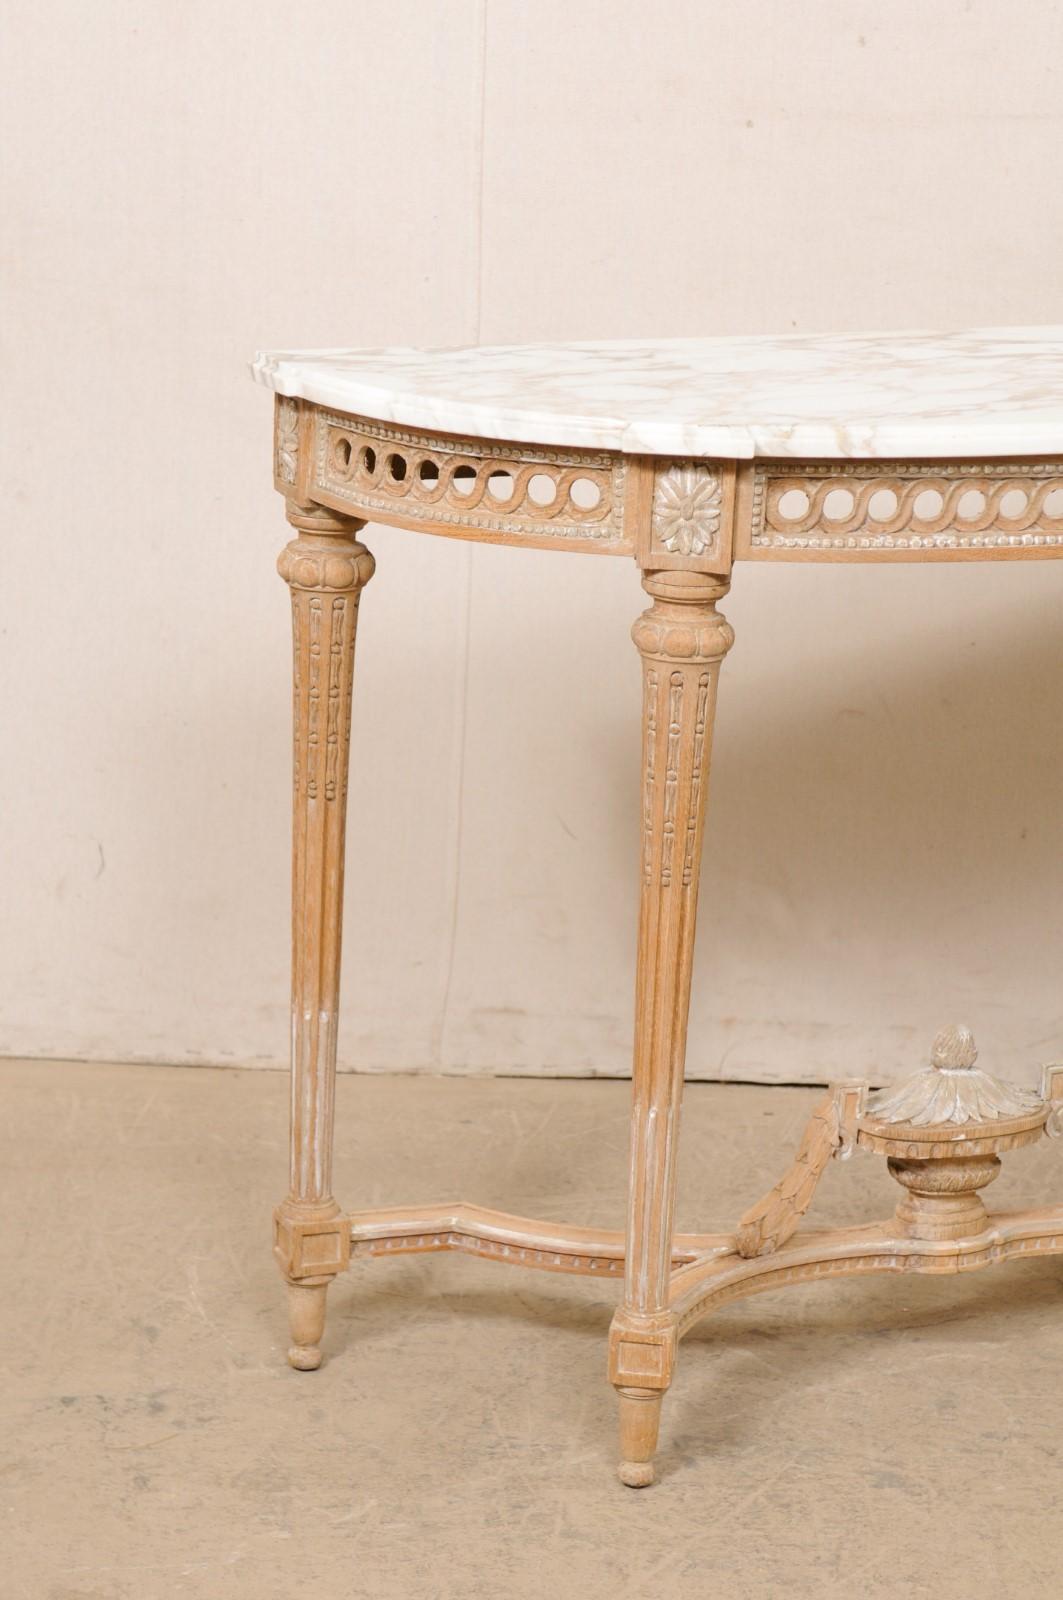 Neoclassical French Neoclassic Style Marble-Top Console Table W/Nice Urn Finial at Underside For Sale